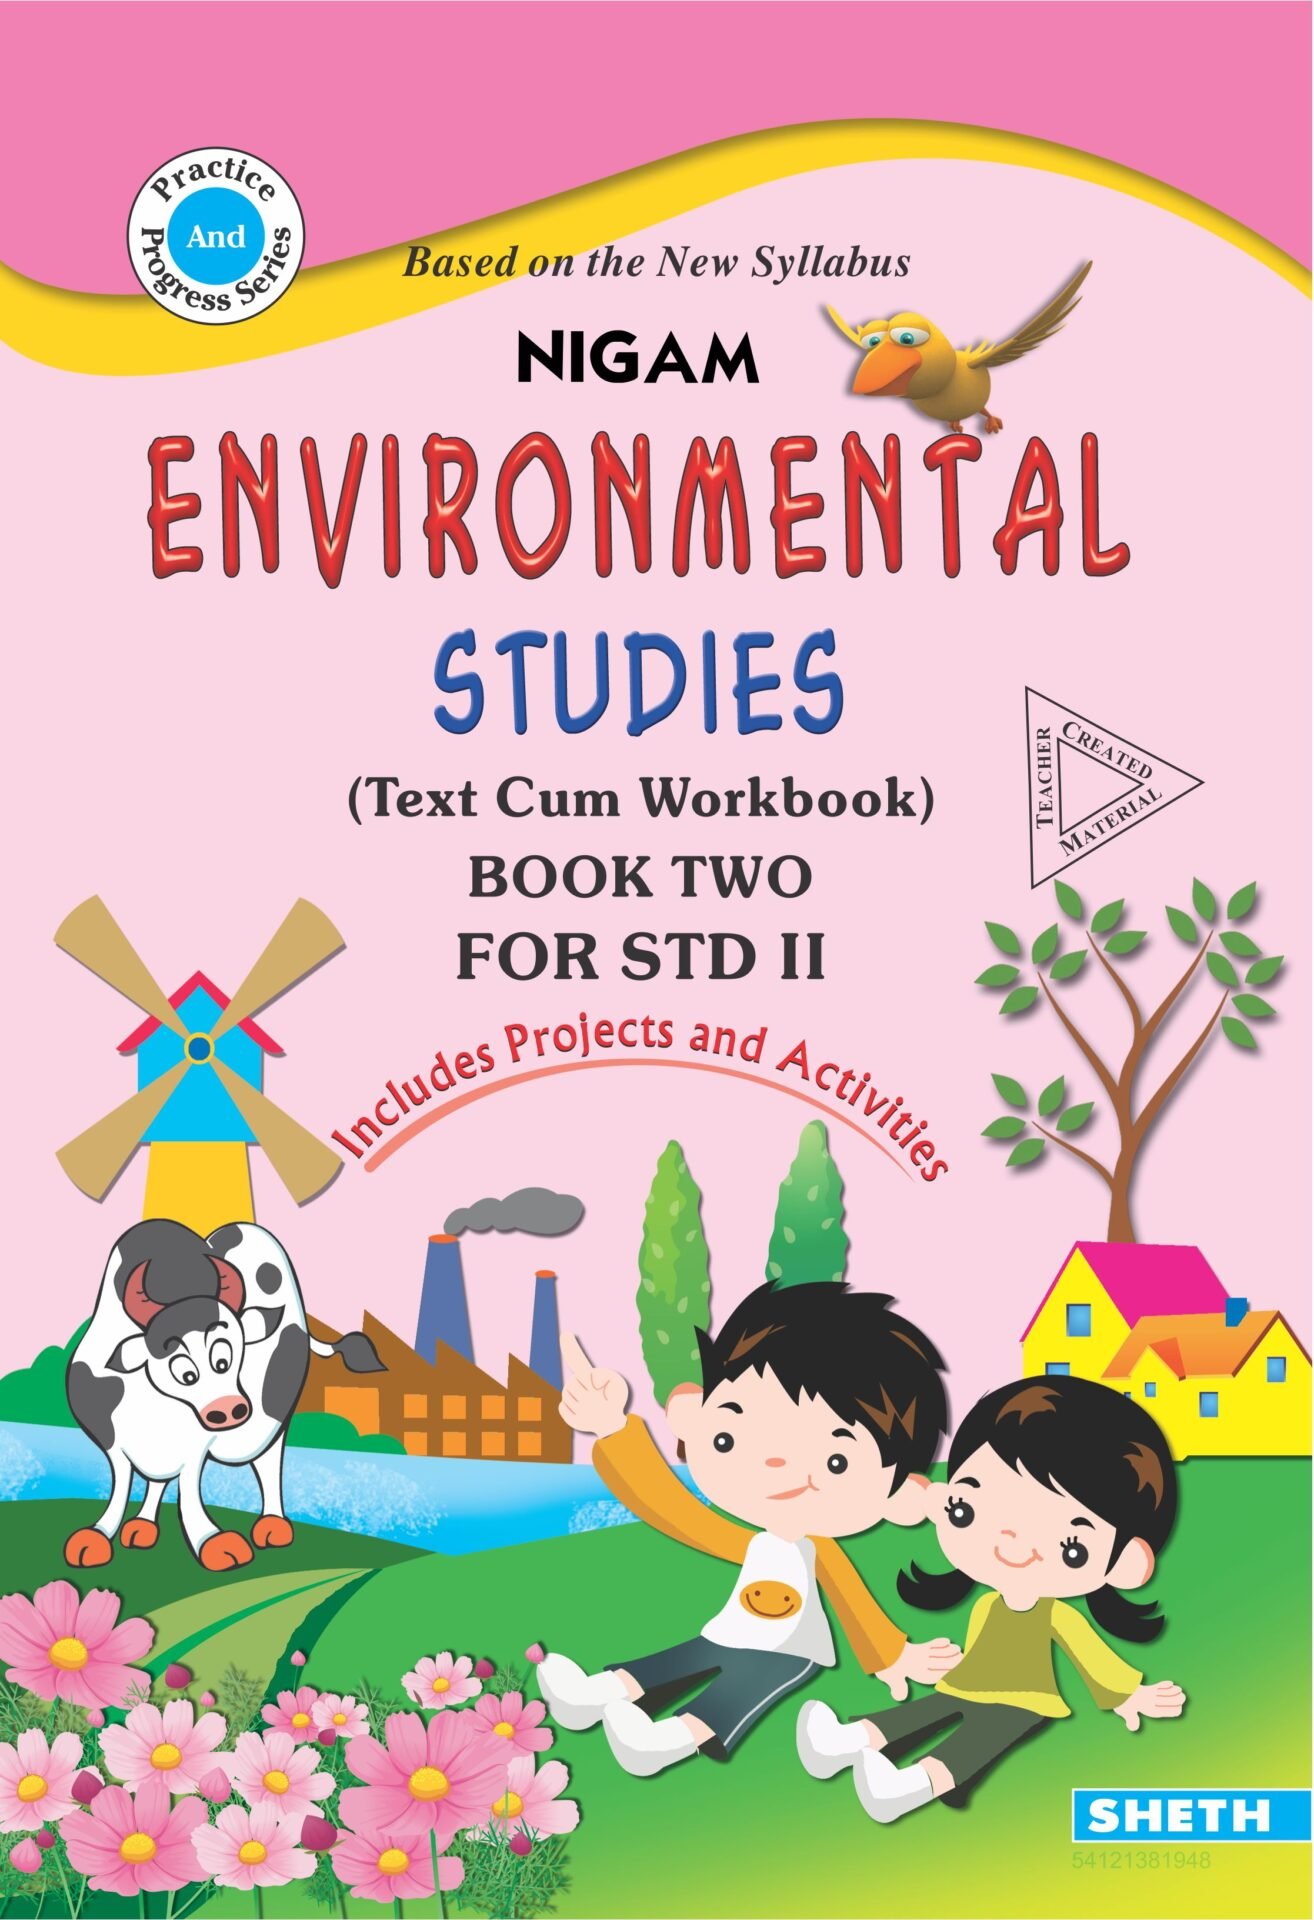 Studies　Shethbooks　Environmental　for　Official　STD.　II　Buy　House　Page　of　SHETH　Publishing　Nigam　Book